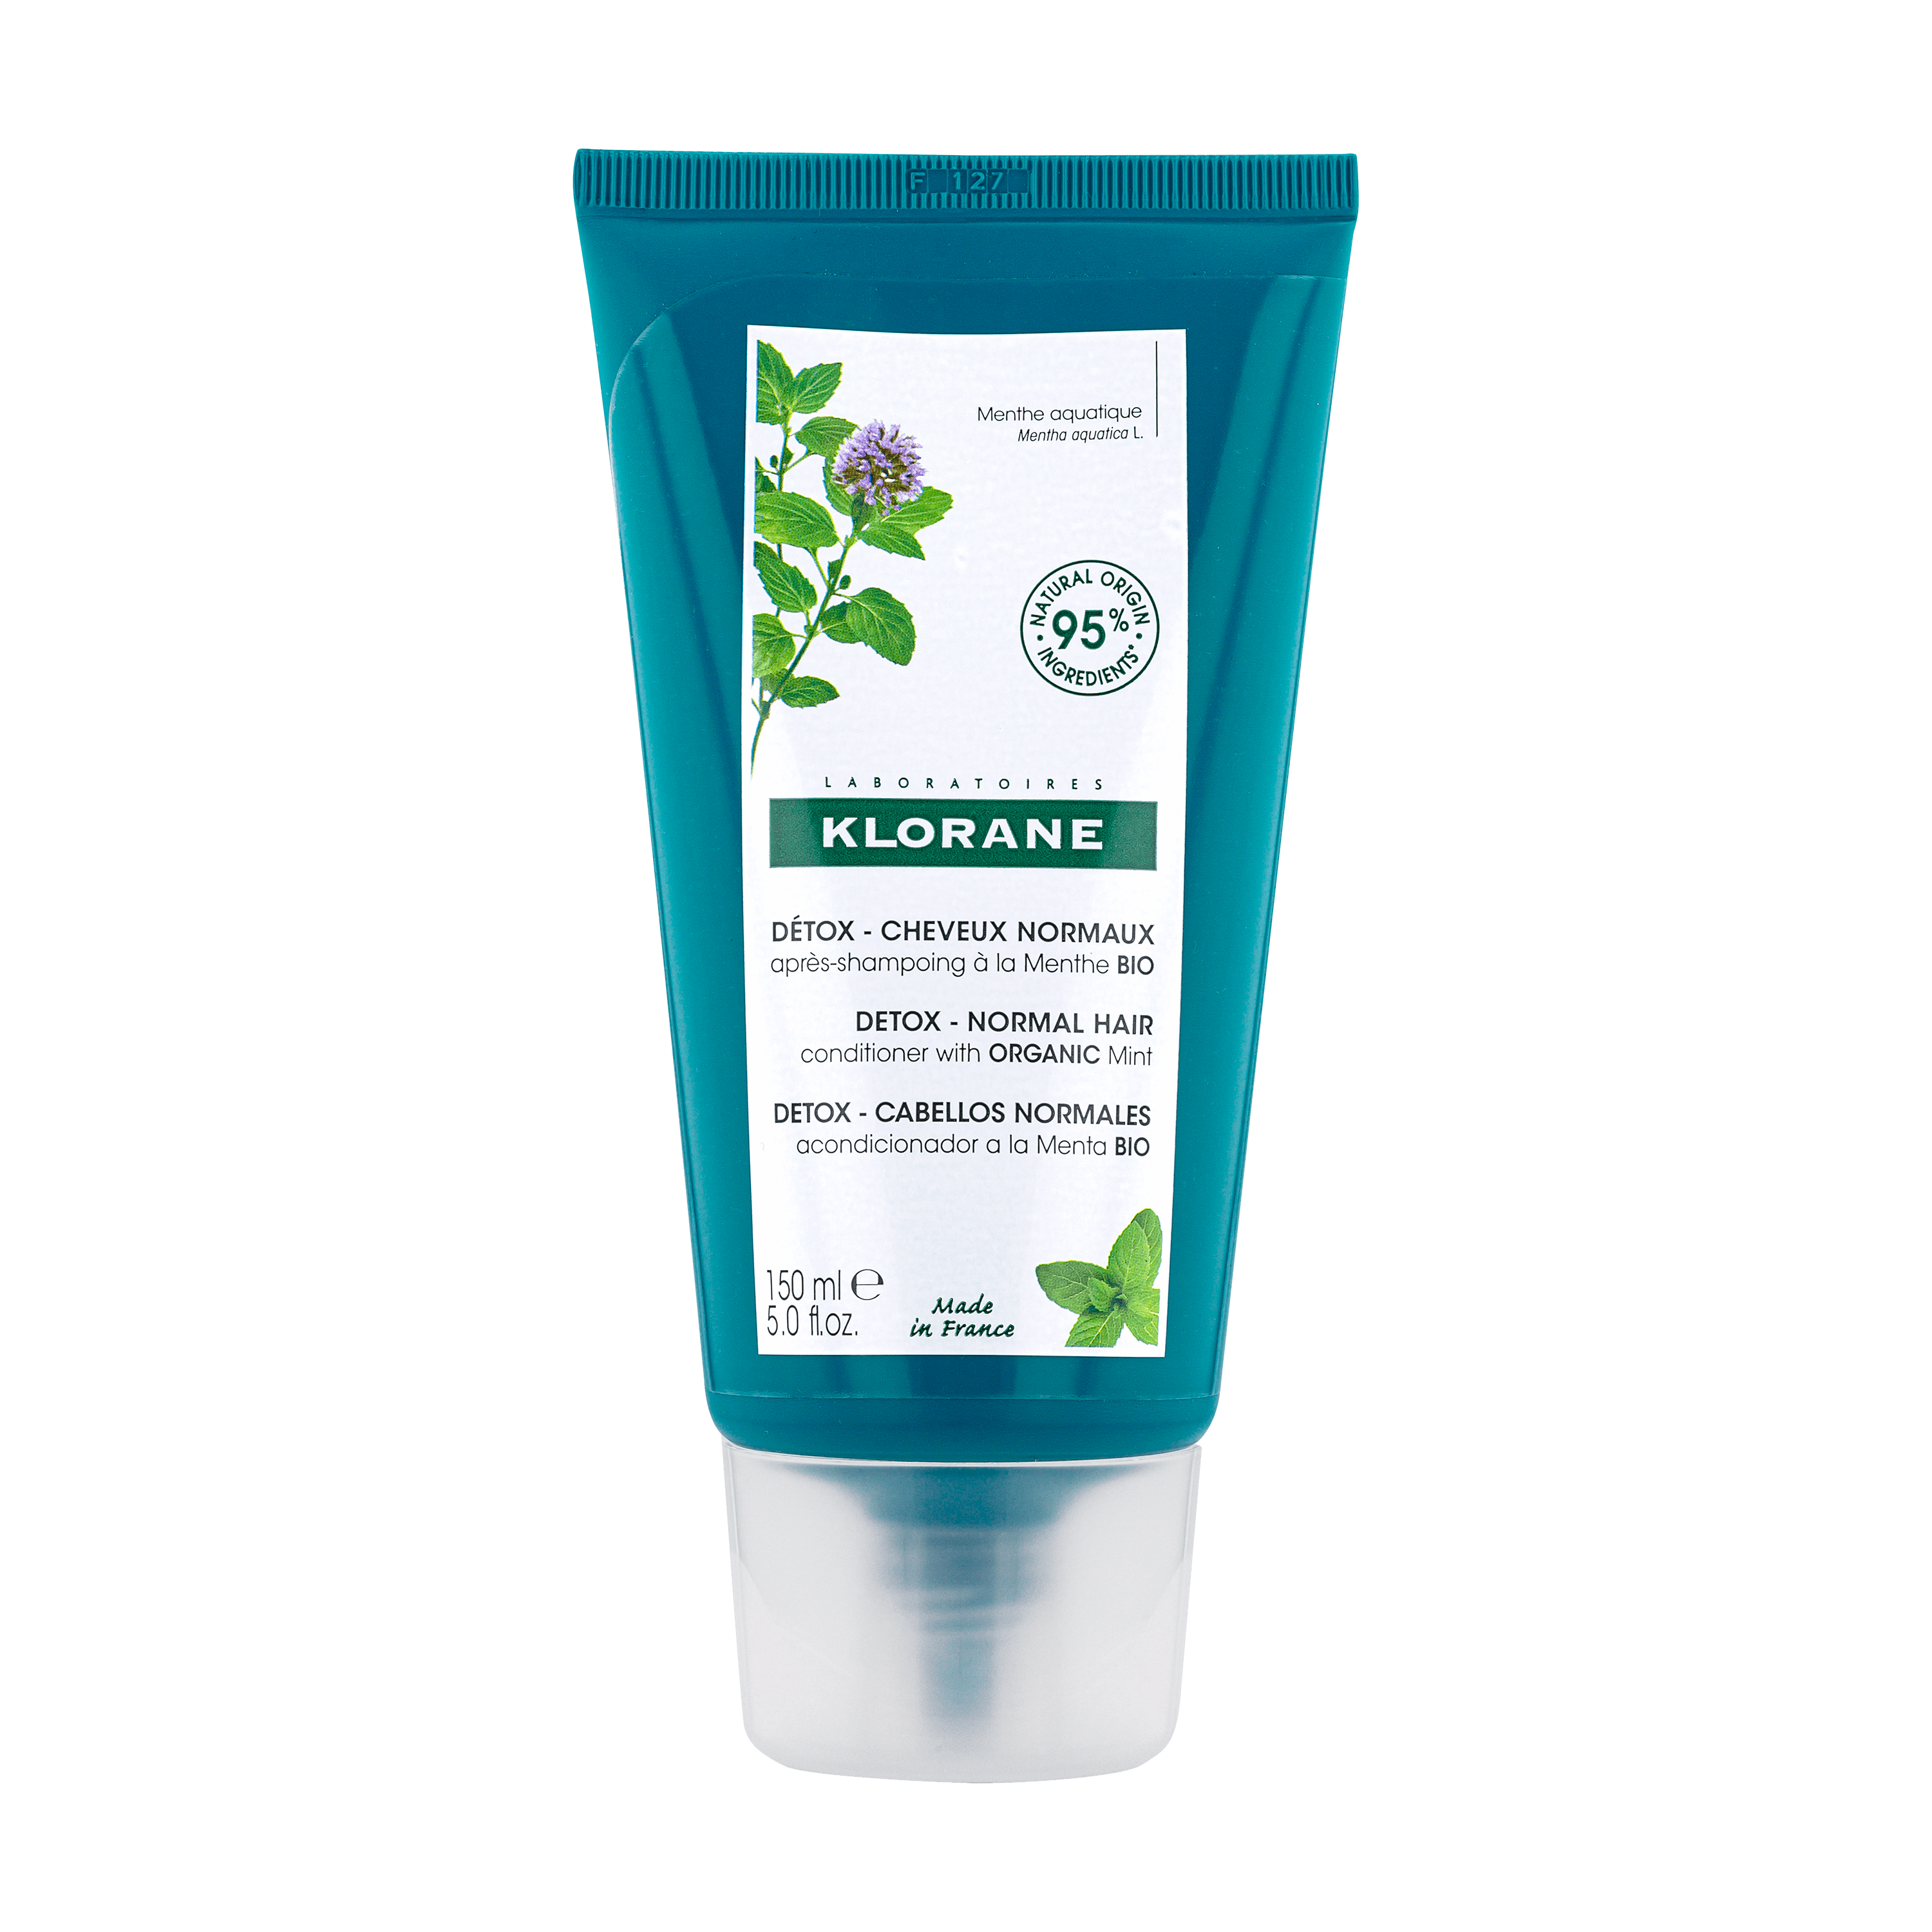 Klorane Detox Conditioner with Organic Mint 150ml - Normal Hair